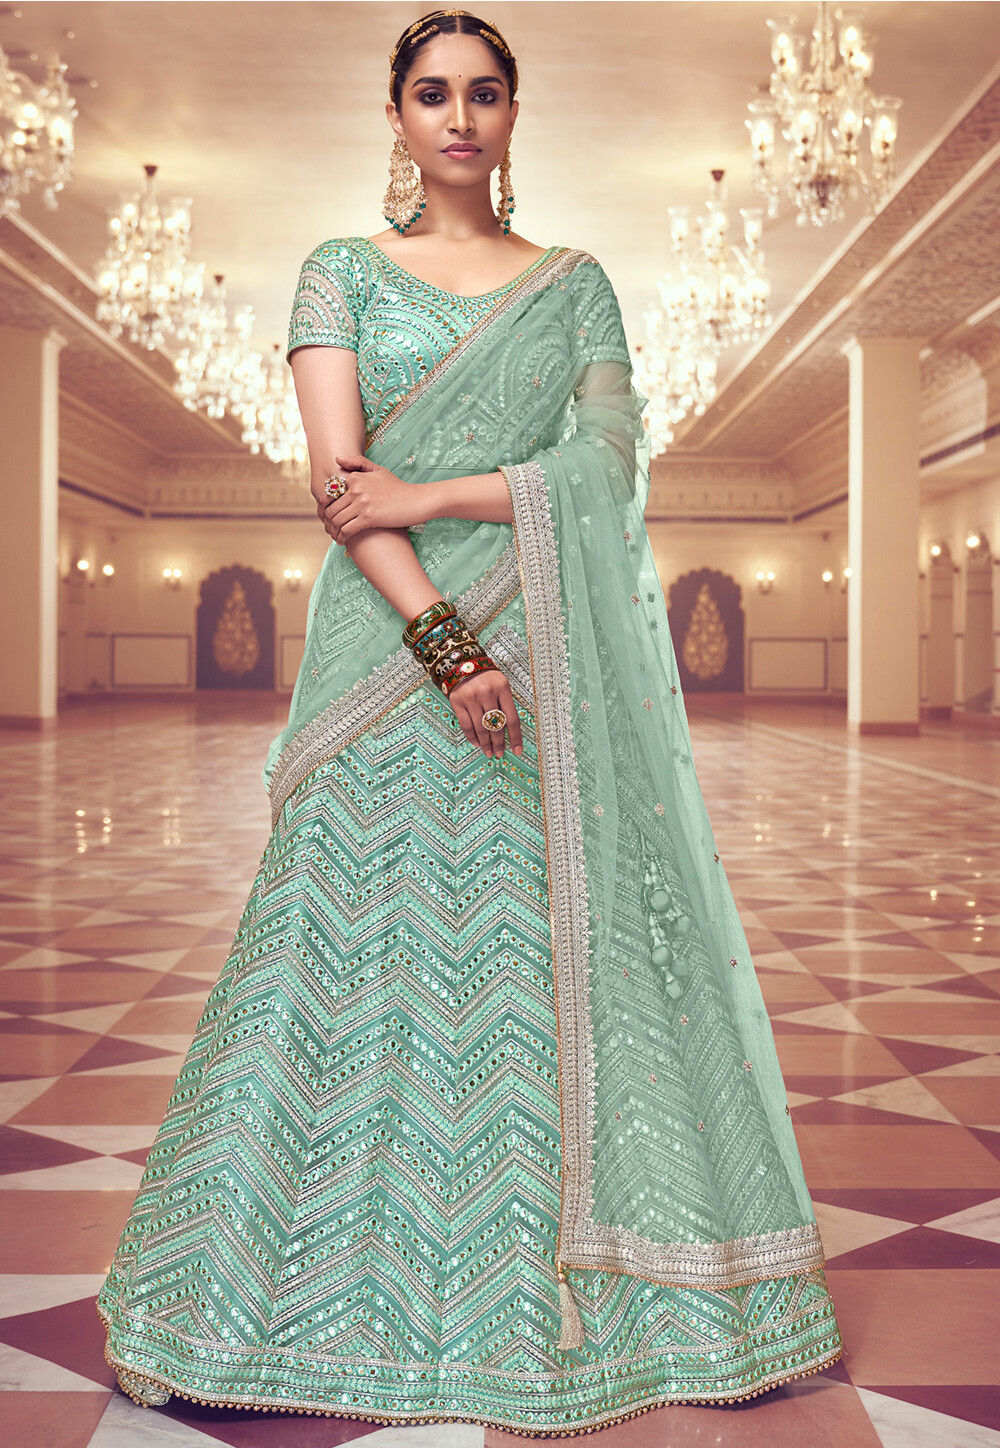 Trending Pastel Green Jewellery Ideas For Brides-To-Be | Bridal outfits,  Indian bridal fashion, Wedding lehenga designs